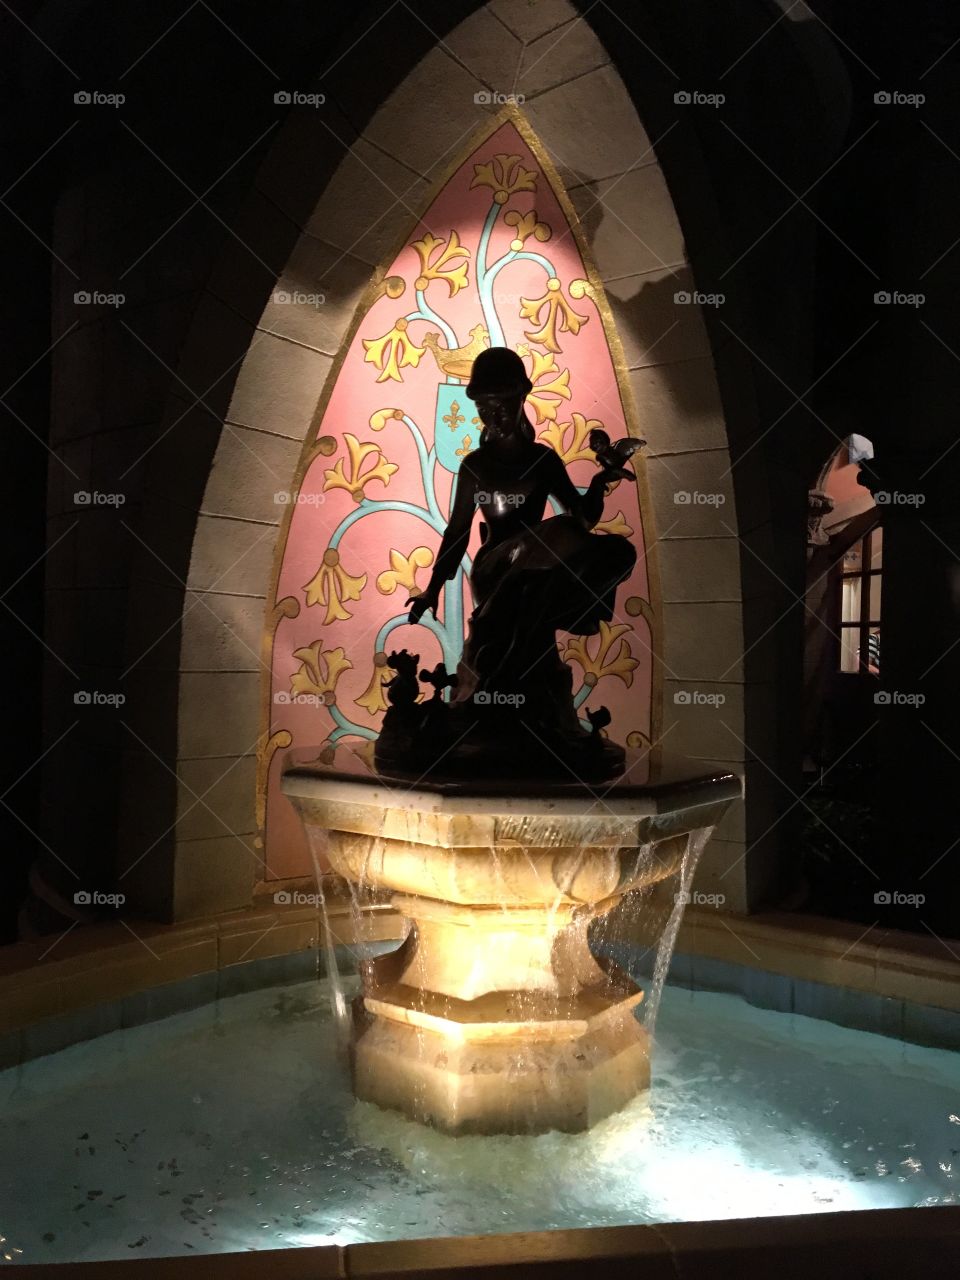 Maiden at a fountain or a princess? Look closely